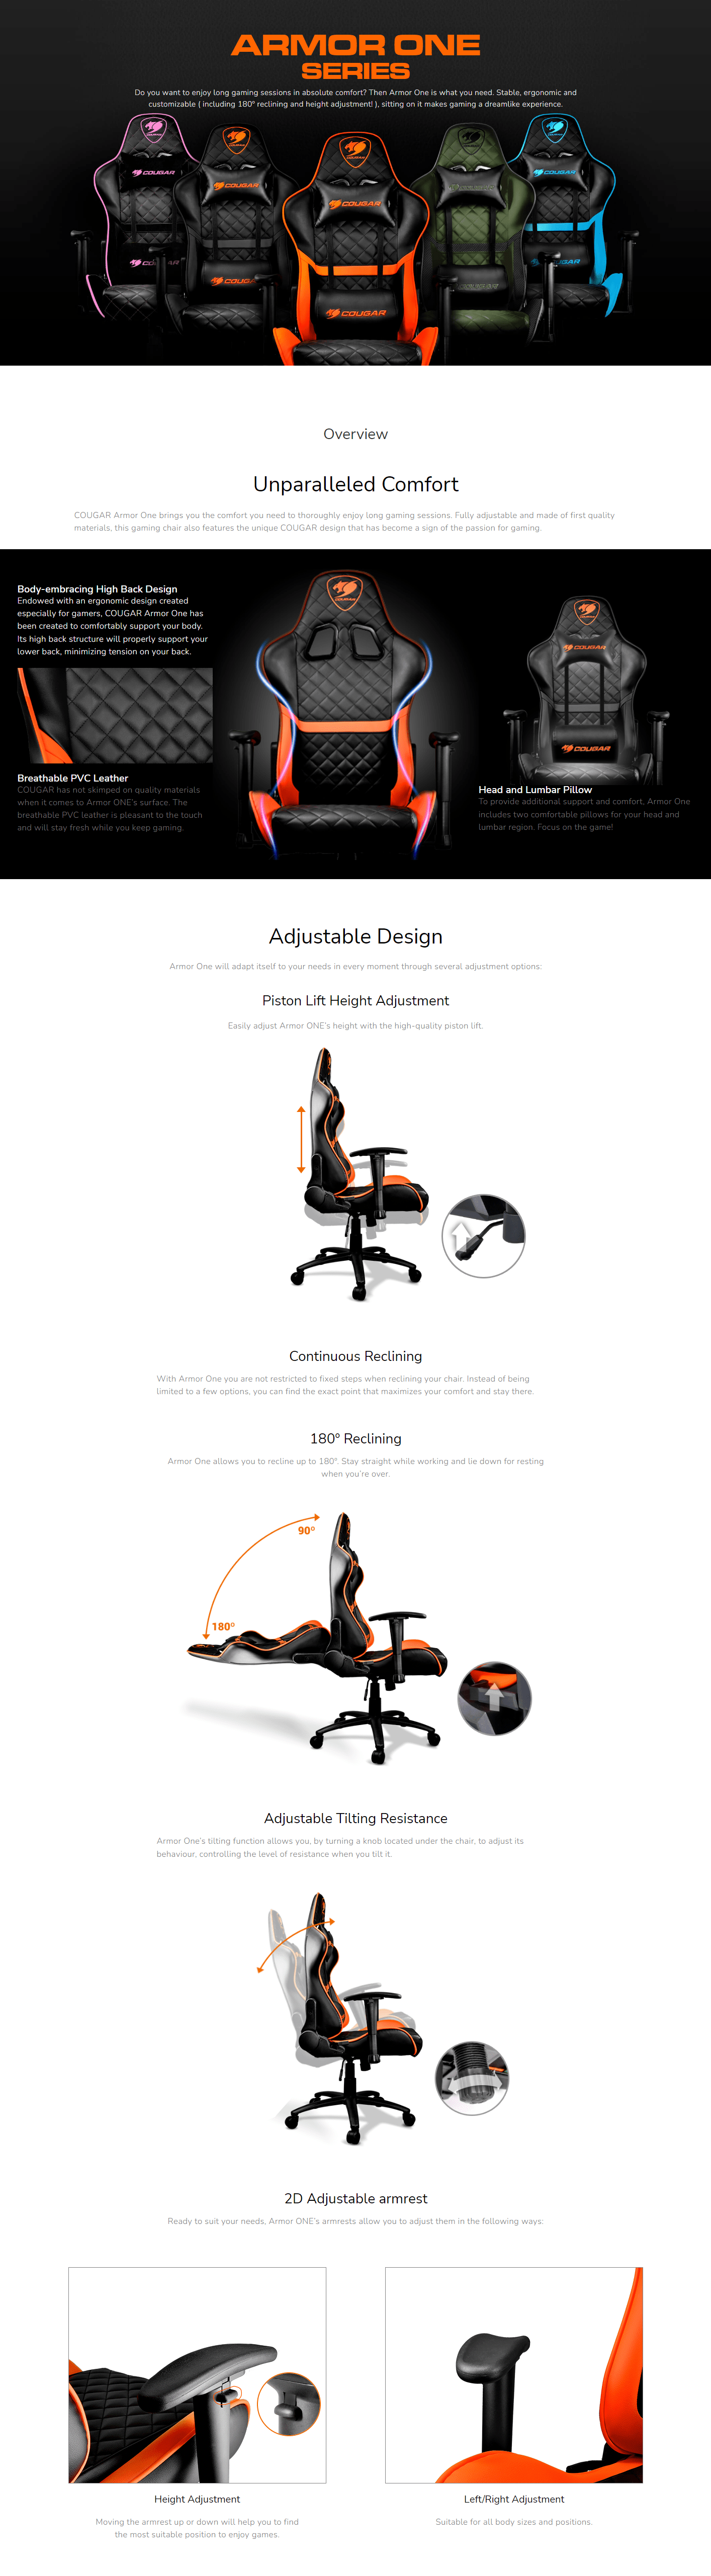 COUGAR ARMOR ONE- Gaming Chair